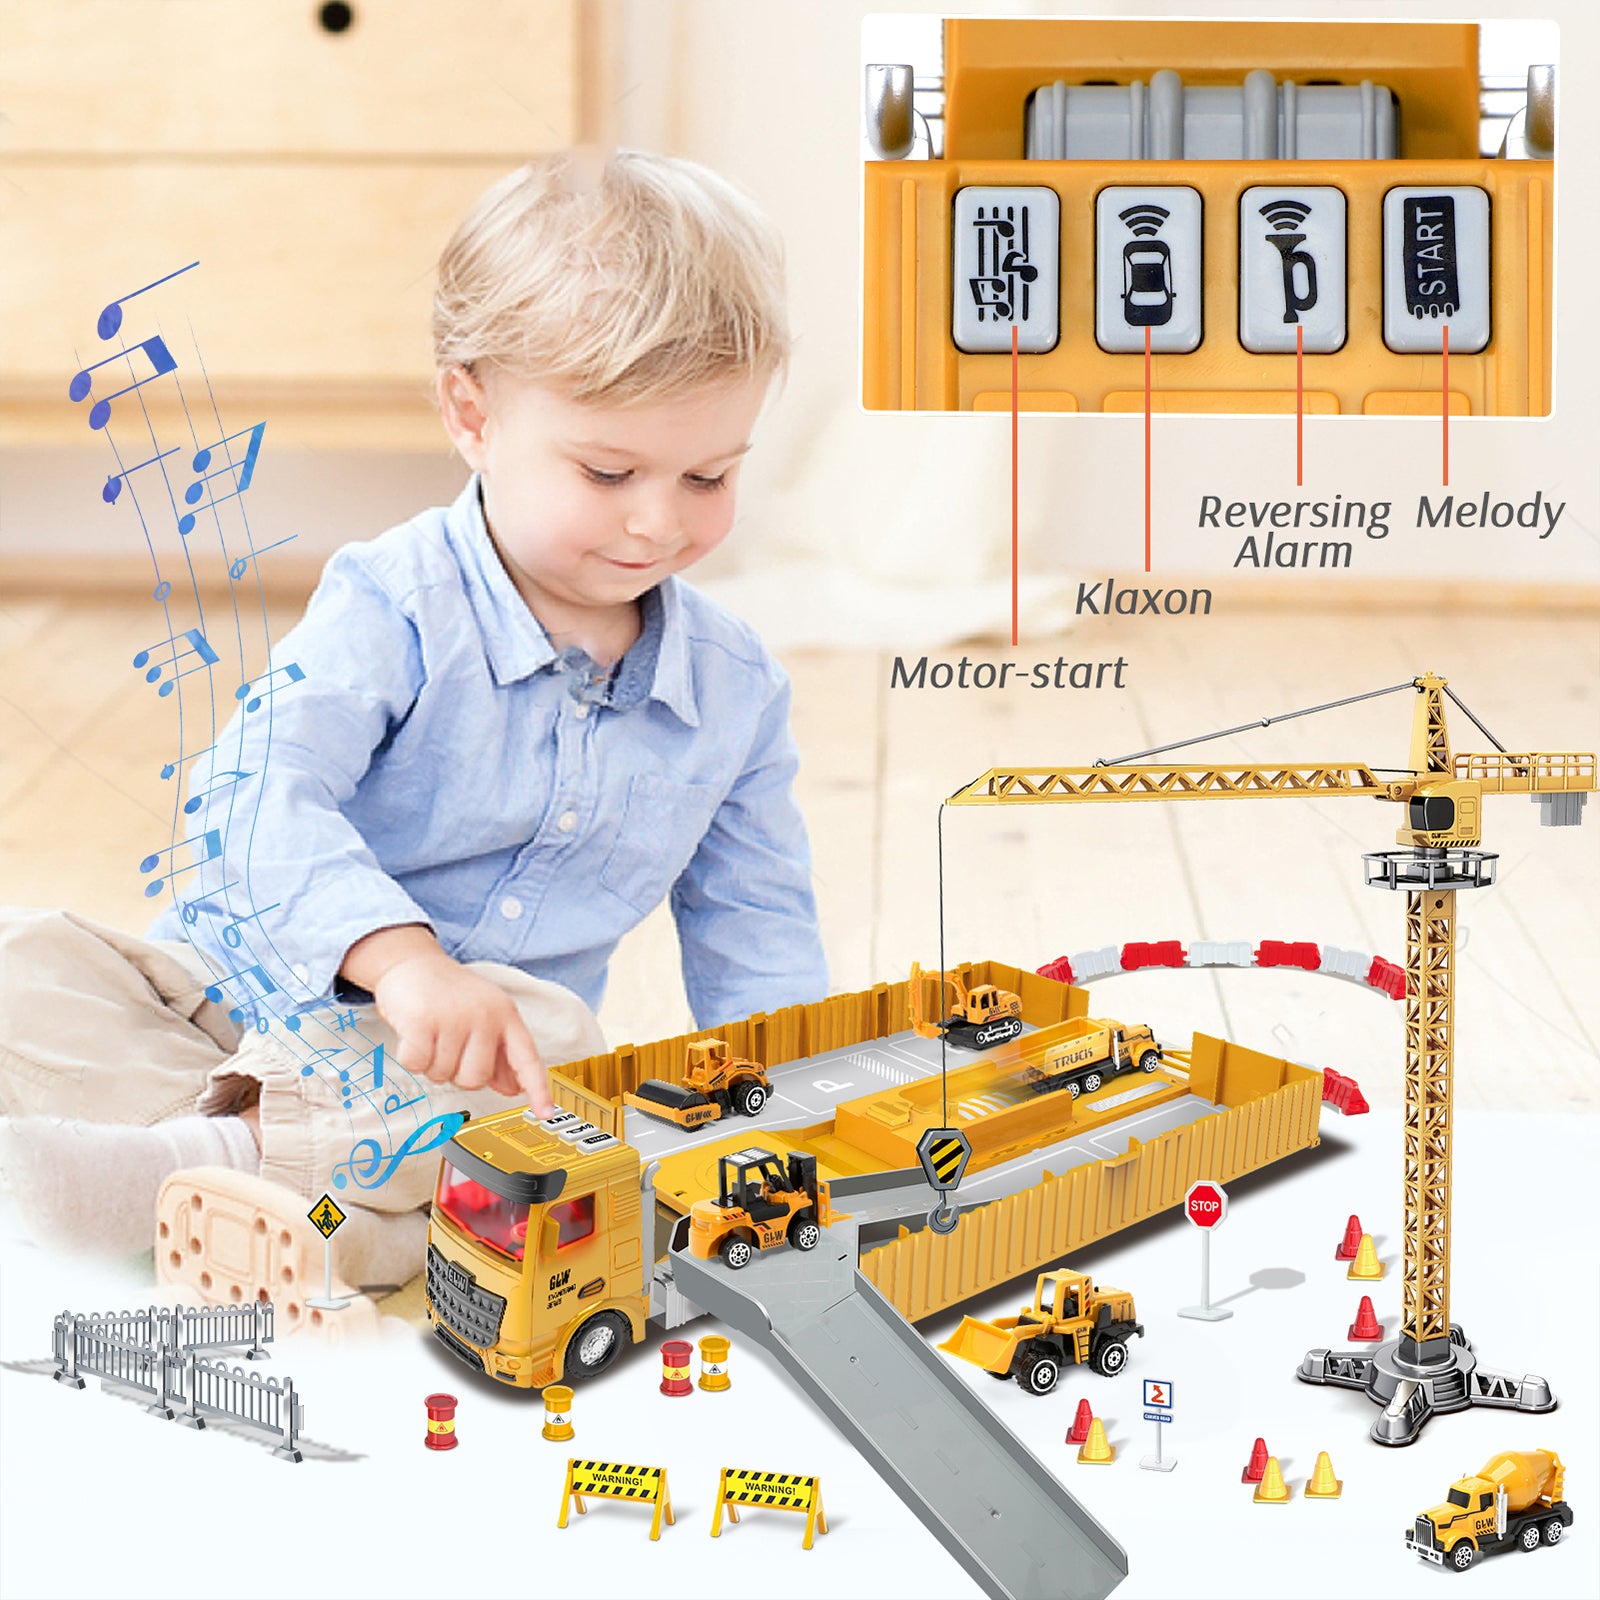 Construction Vehicles for Toddler Educational Toys